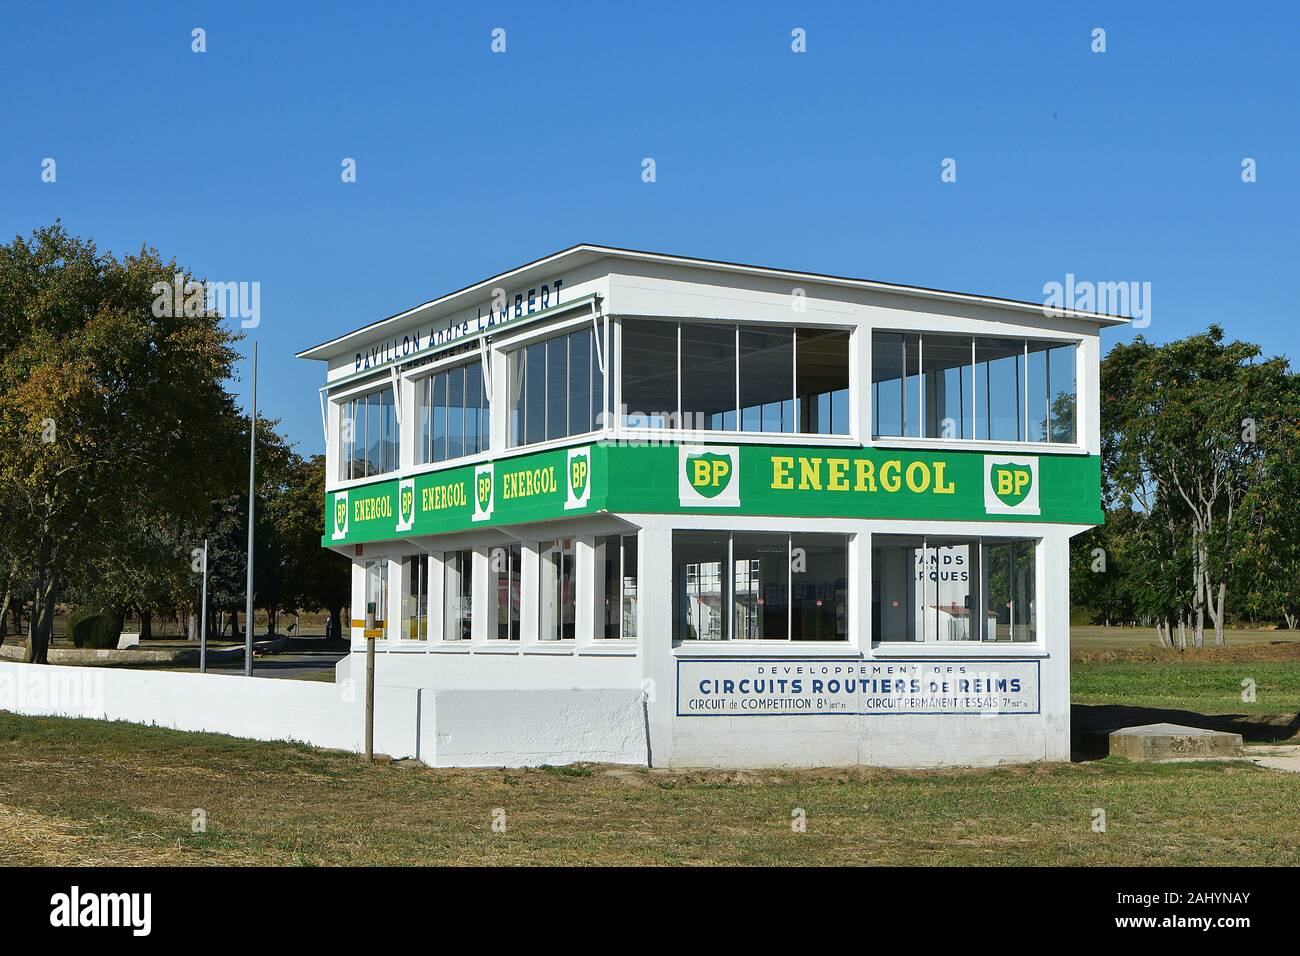 Pavillon Lambert, timekeepers' building of the Reims-Gueux Circuit (north-eastern France). The site has been restored with the help of the Fondation Stock Photo